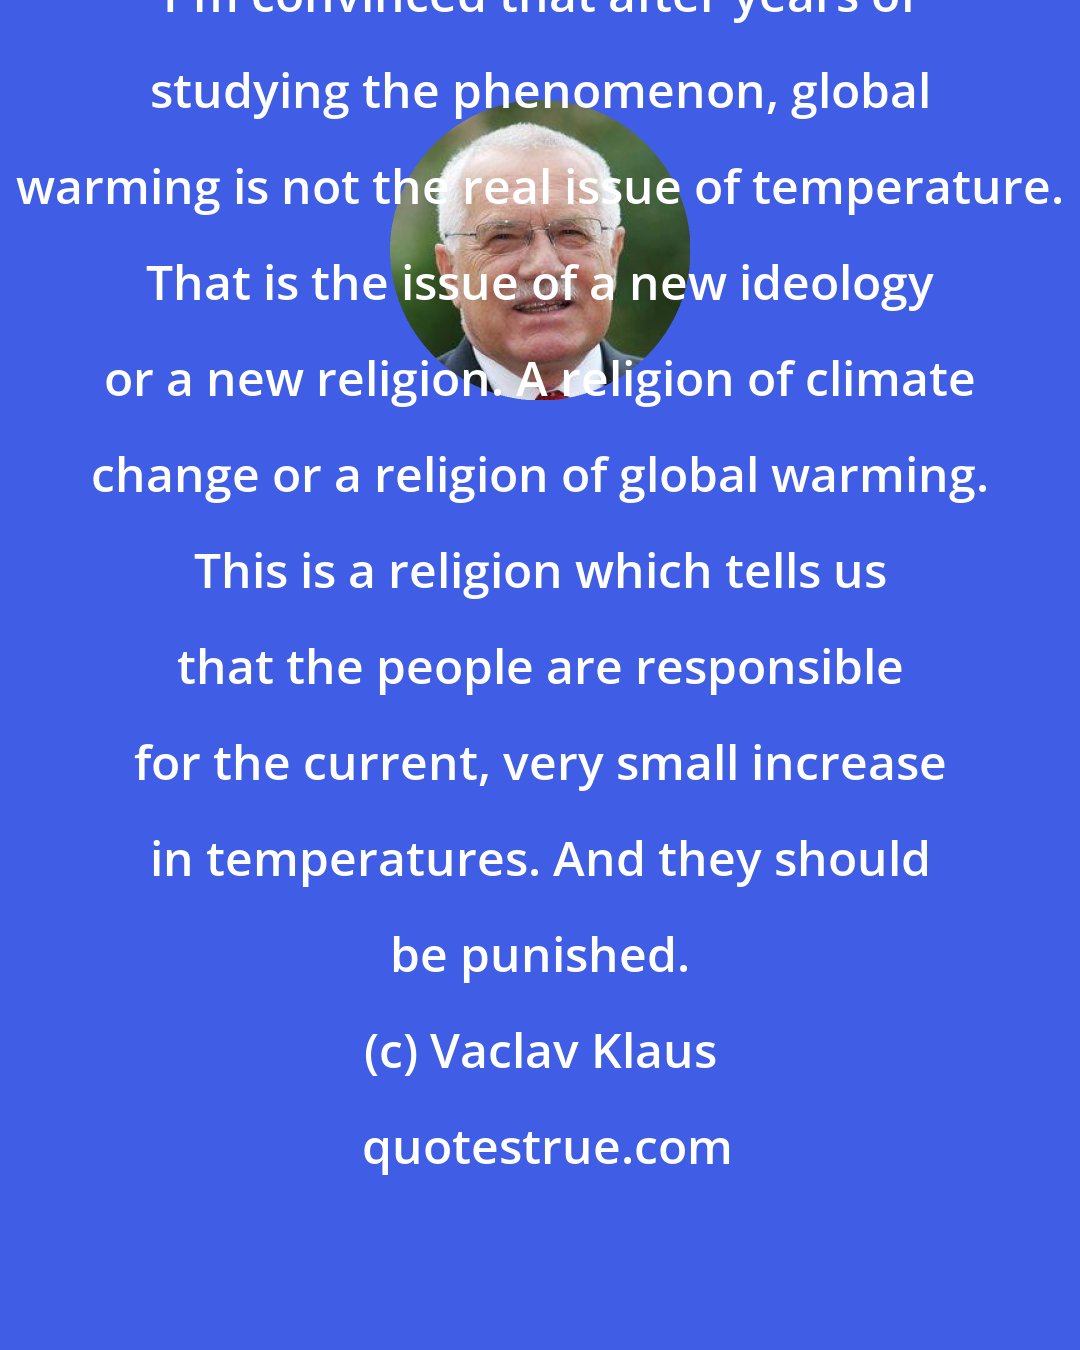 Vaclav Klaus: I'm convinced that after years of studying the phenomenon, global warming is not the real issue of temperature. That is the issue of a new ideology or a new religion. A religion of climate change or a religion of global warming. This is a religion which tells us that the people are responsible for the current, very small increase in temperatures. And they should be punished.